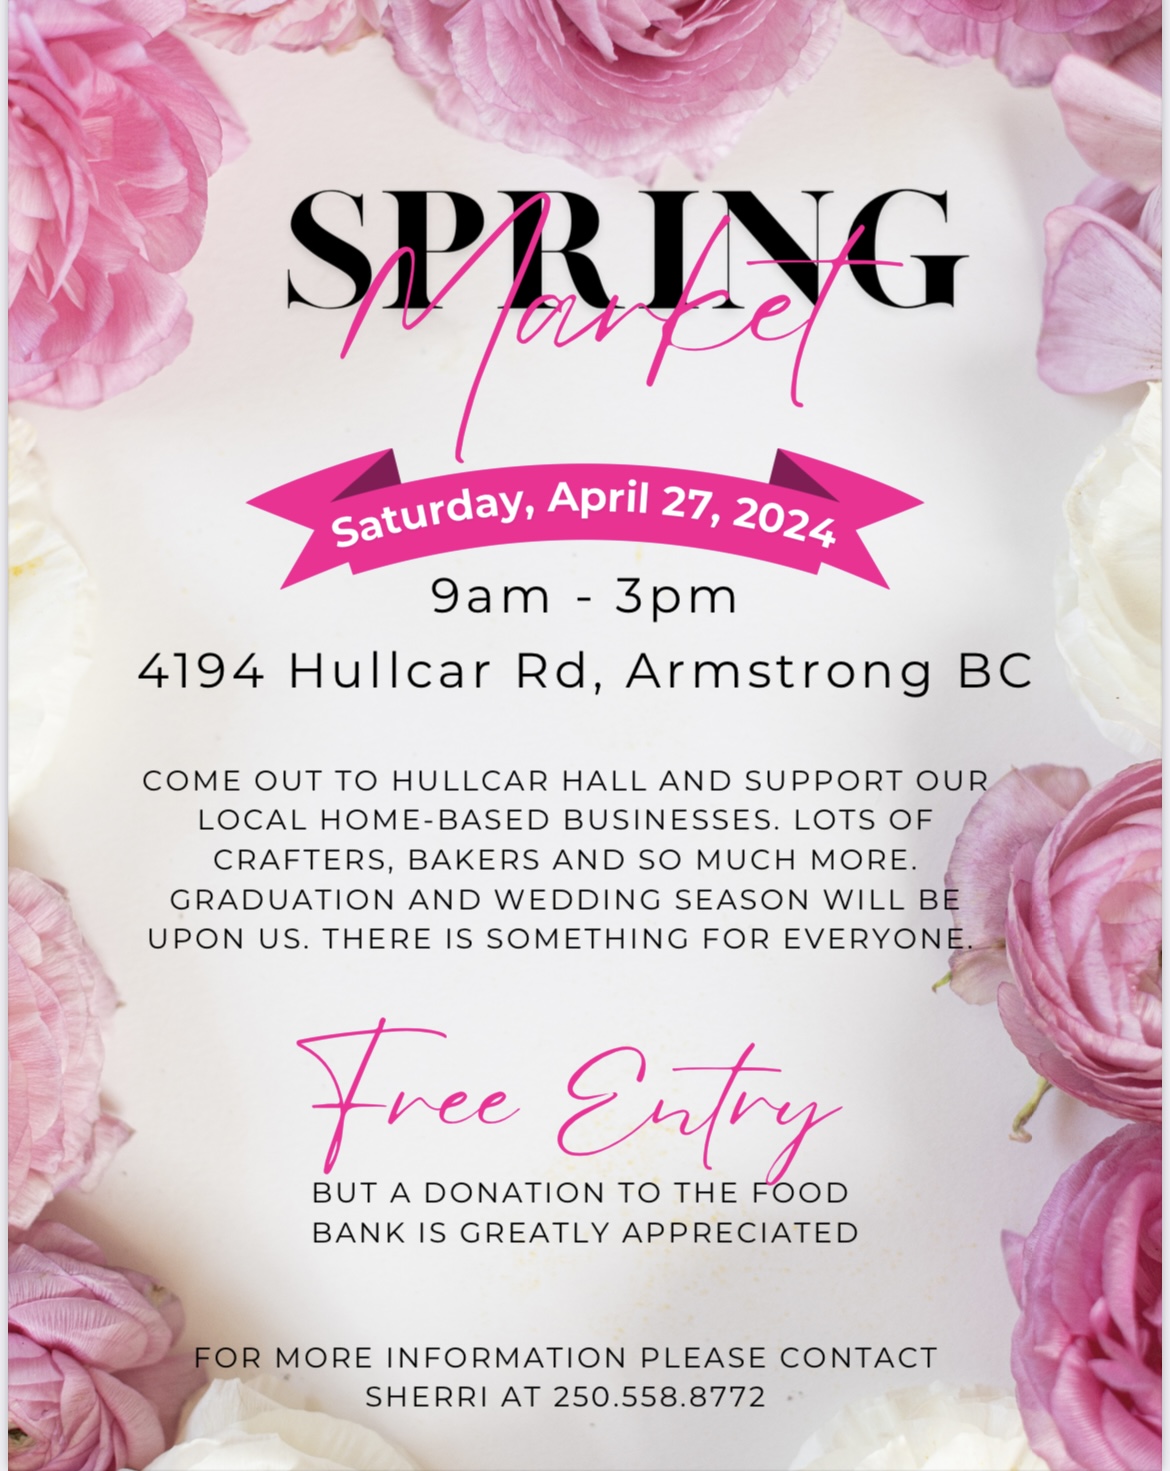 14th annual spring market in Armstrong - image